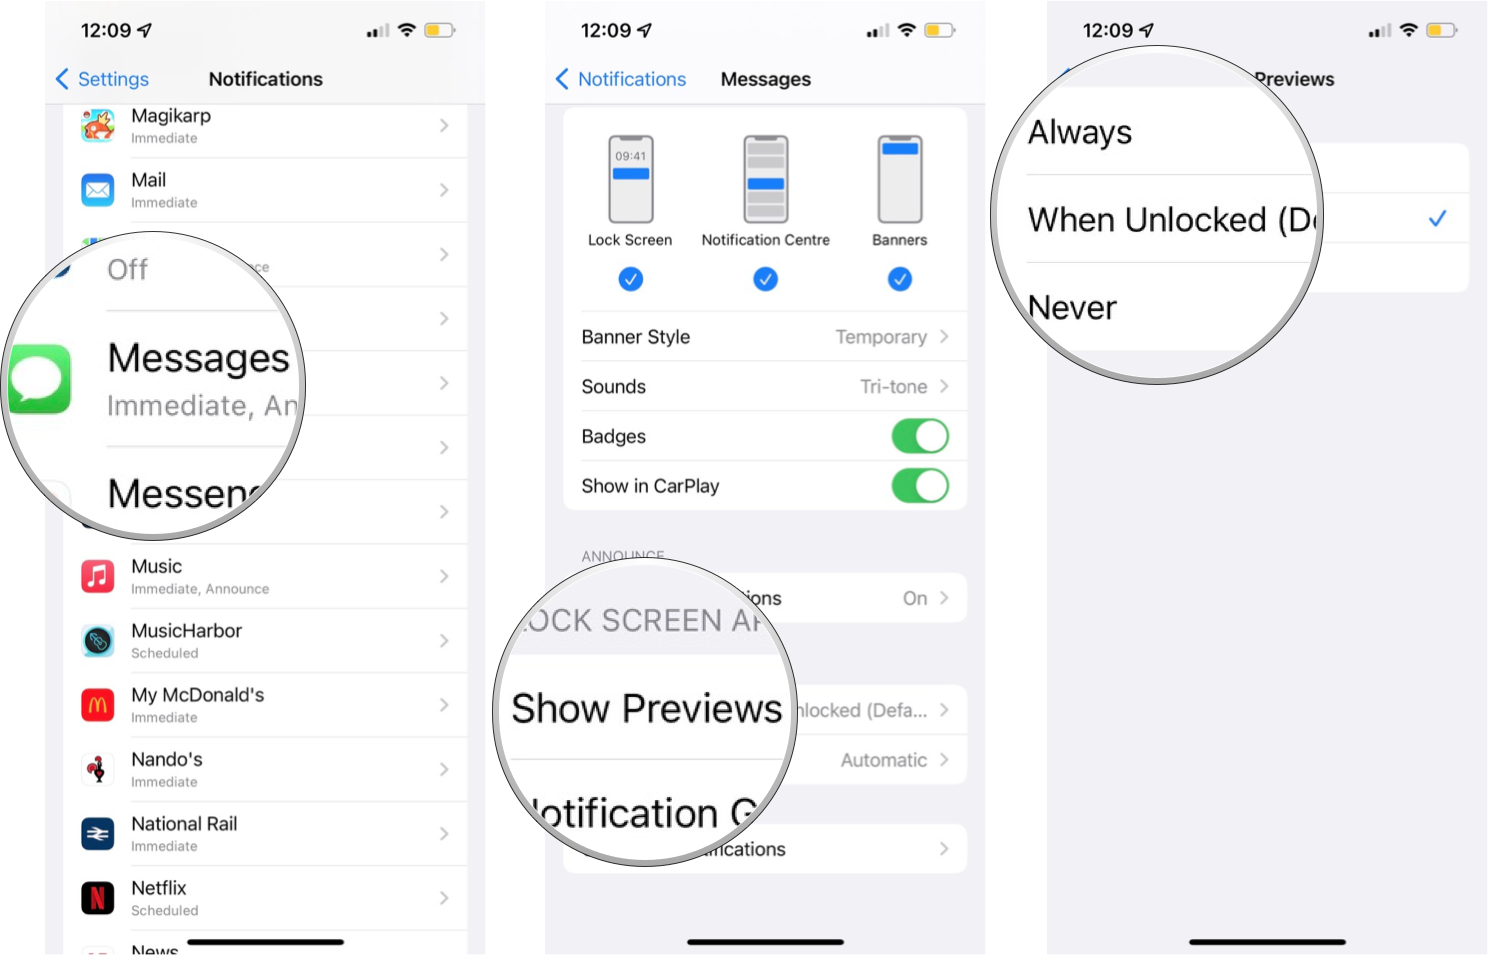 Turn on or turn off message previews in iMessages for iPhone and iPad: Tap Messages, tap Show previews, tap the option you want